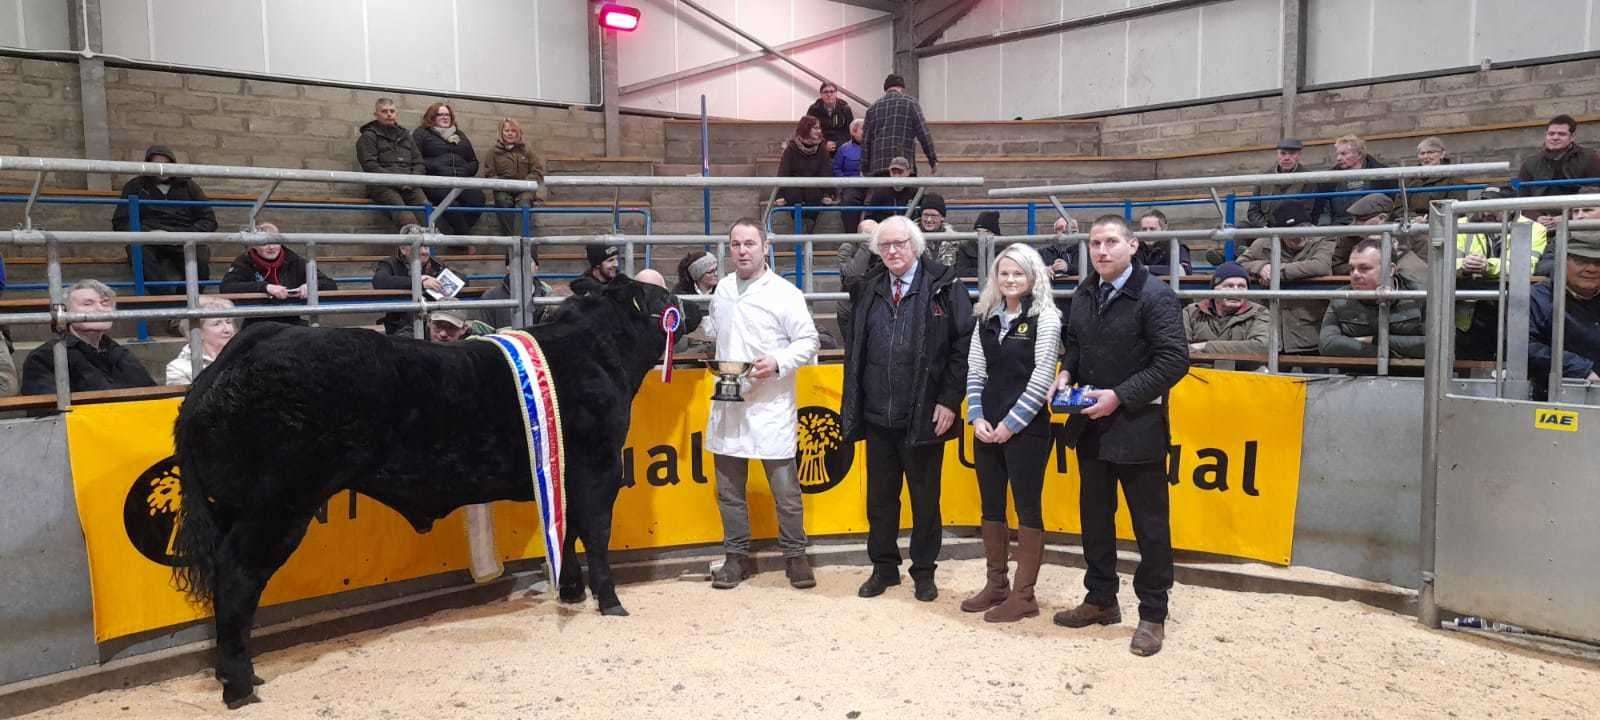 A top price of £3000 was achieved in the prime cattle section at the 2022 show for a Limousin Bullock from G W Begg, scalling 635kg, selling to Mackay’s Hotel, Wick.